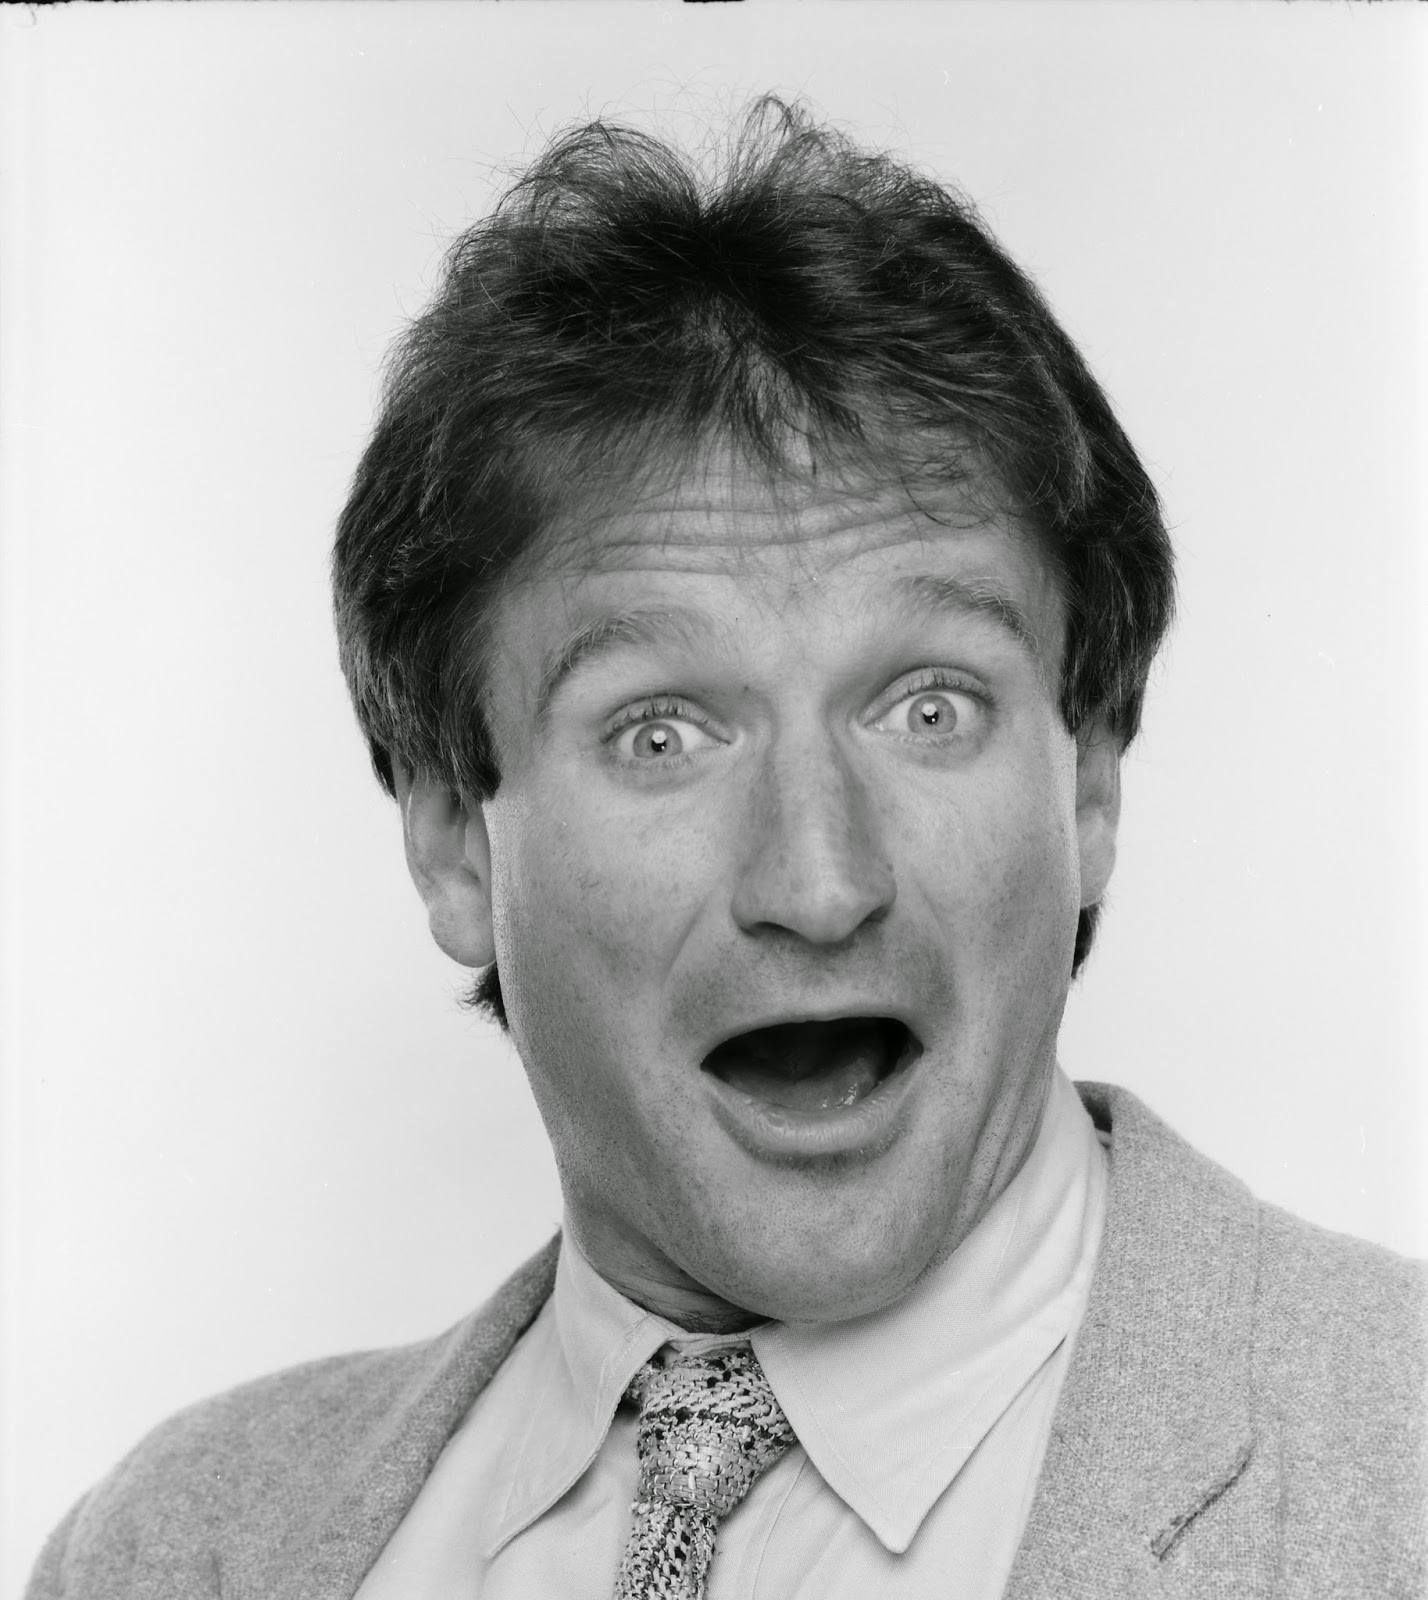 Animopus: Robin Williams - A Study of Motion and Body Language